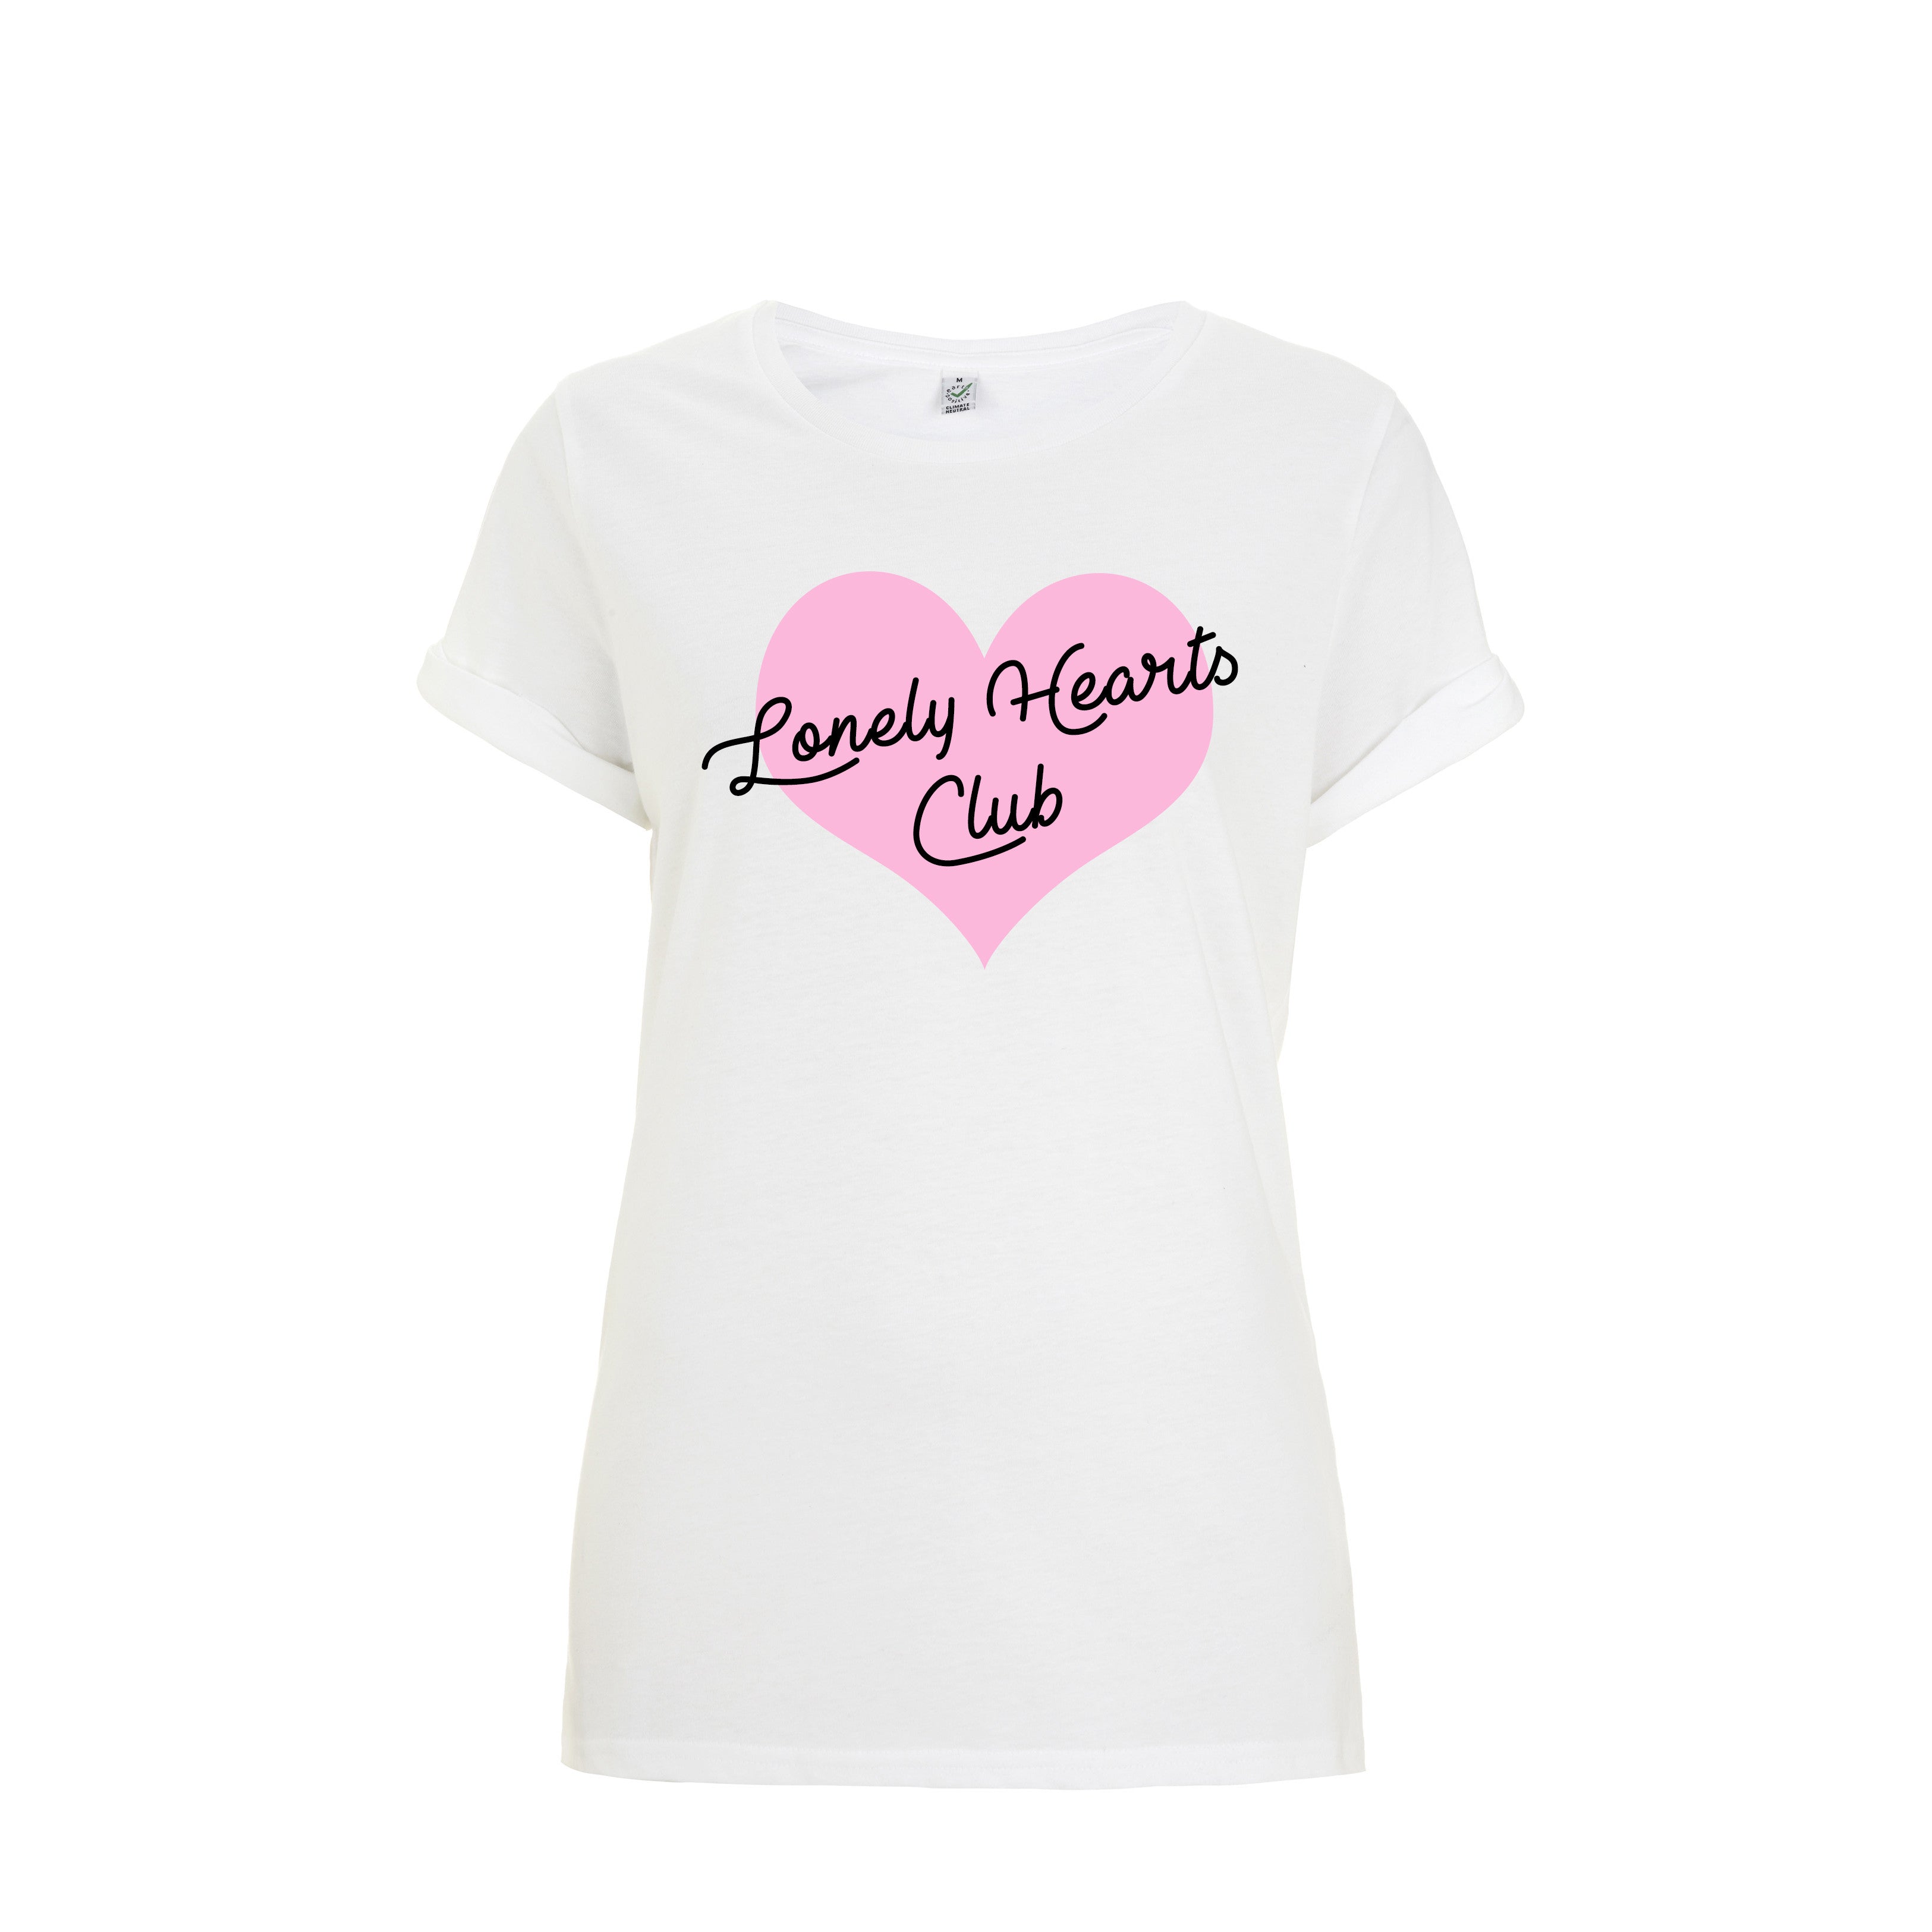 Lonely Hearts Club The Beatles tee from LA LA LAND